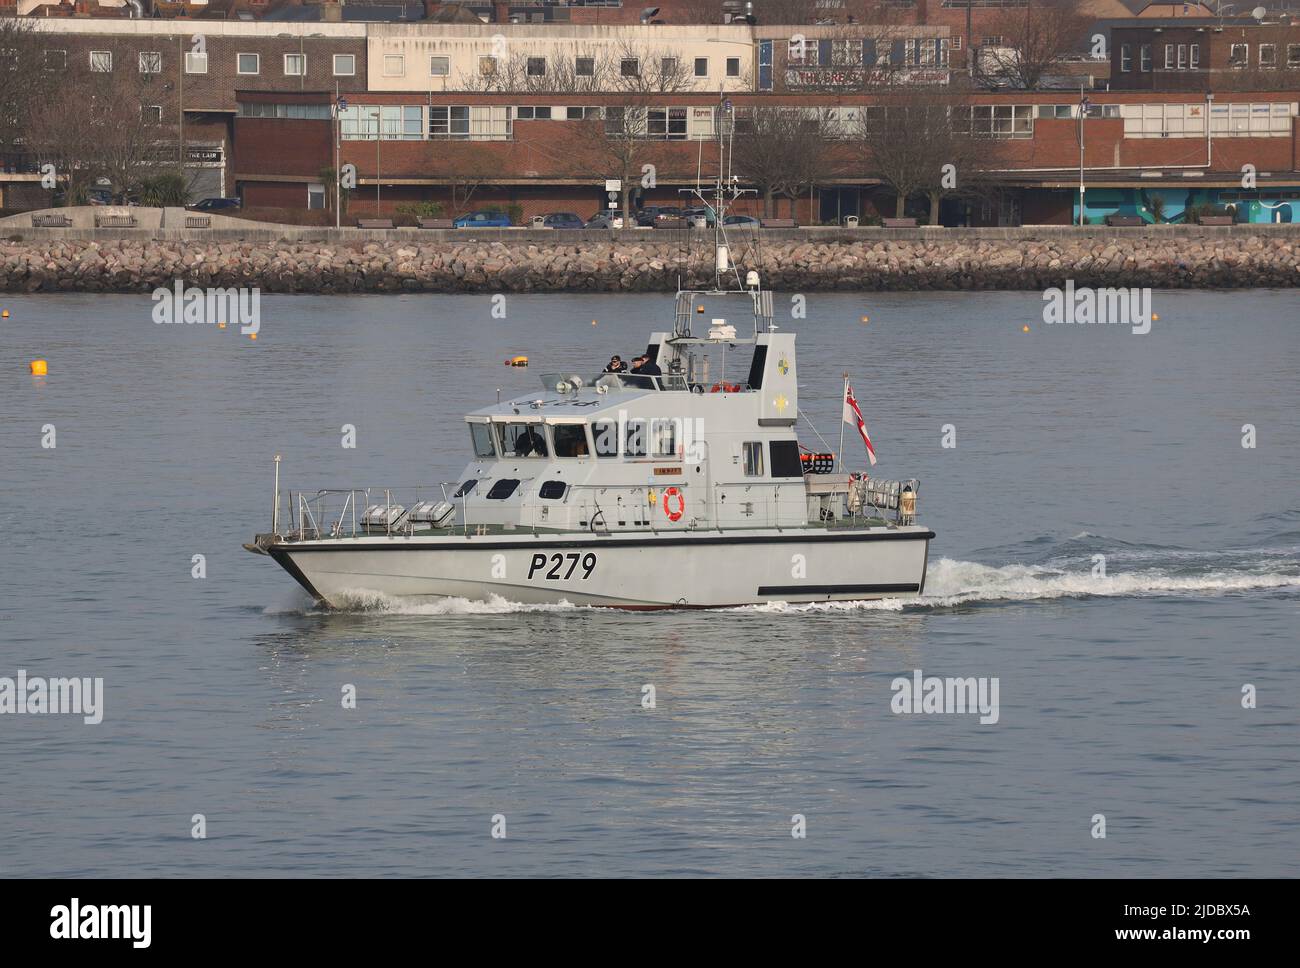 The Royal Navy Fast Training boat HMS BLAZER leaves harbour Stock Photo